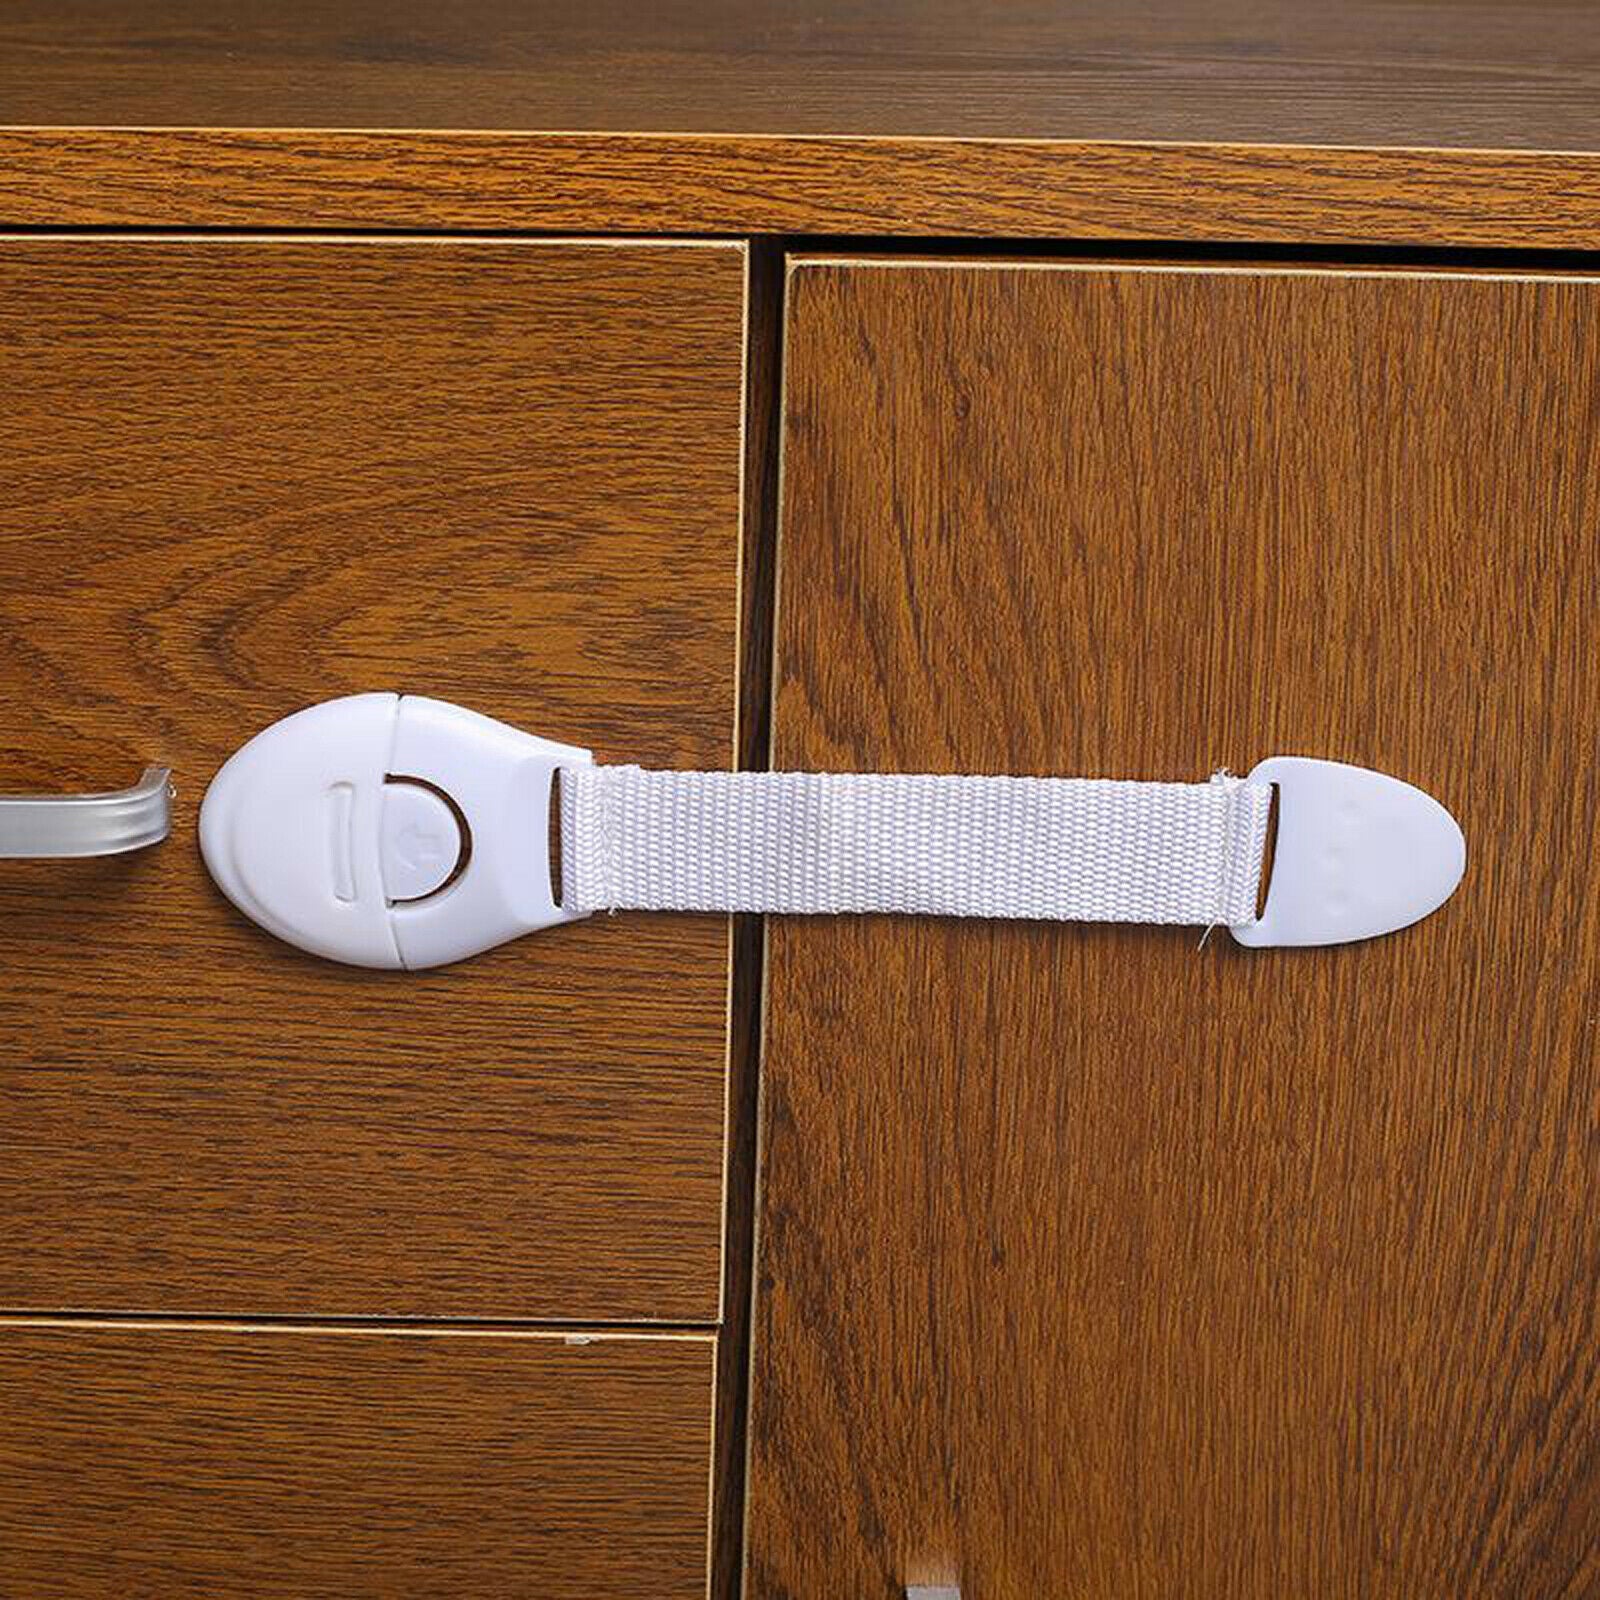 10 Packs Baby Safety Lock Adjustable Straps Latches for Fridge Cabinet